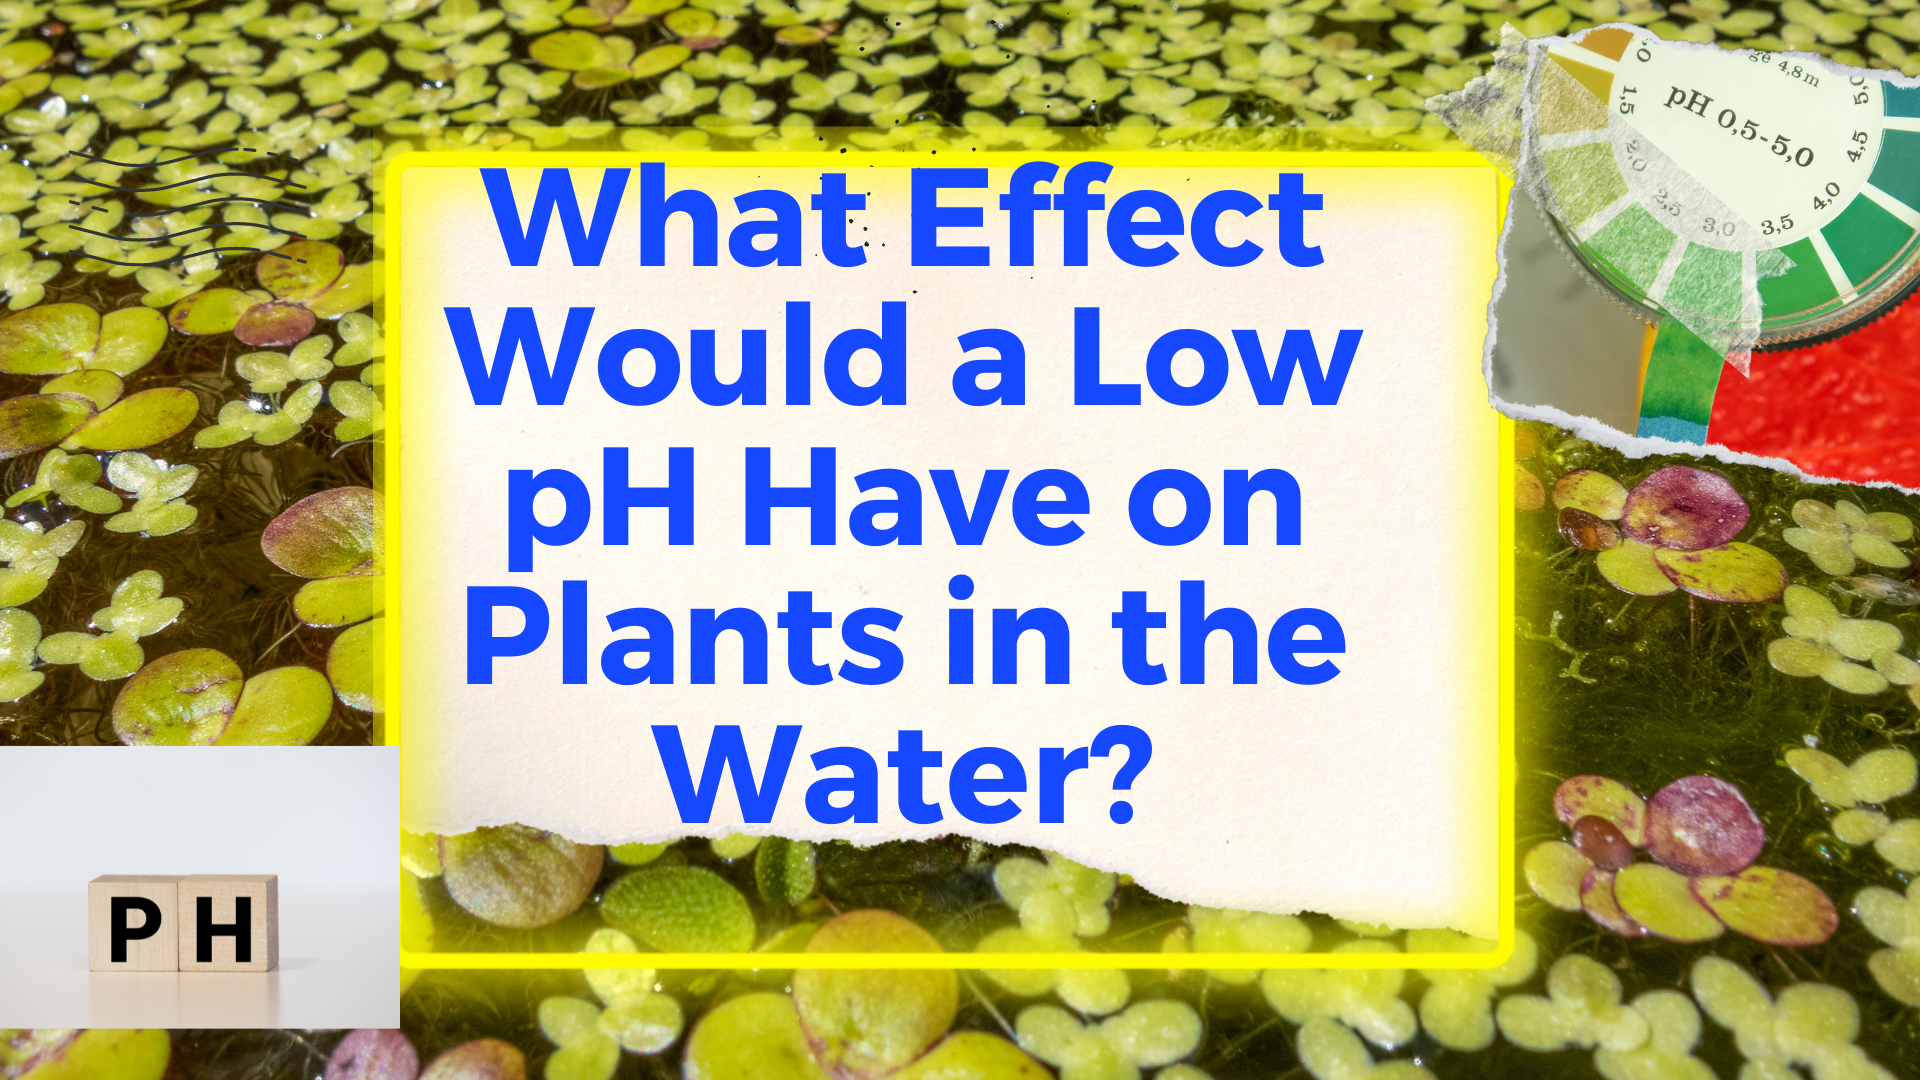 What Effect Would a Low pH Have on Plants in the Water